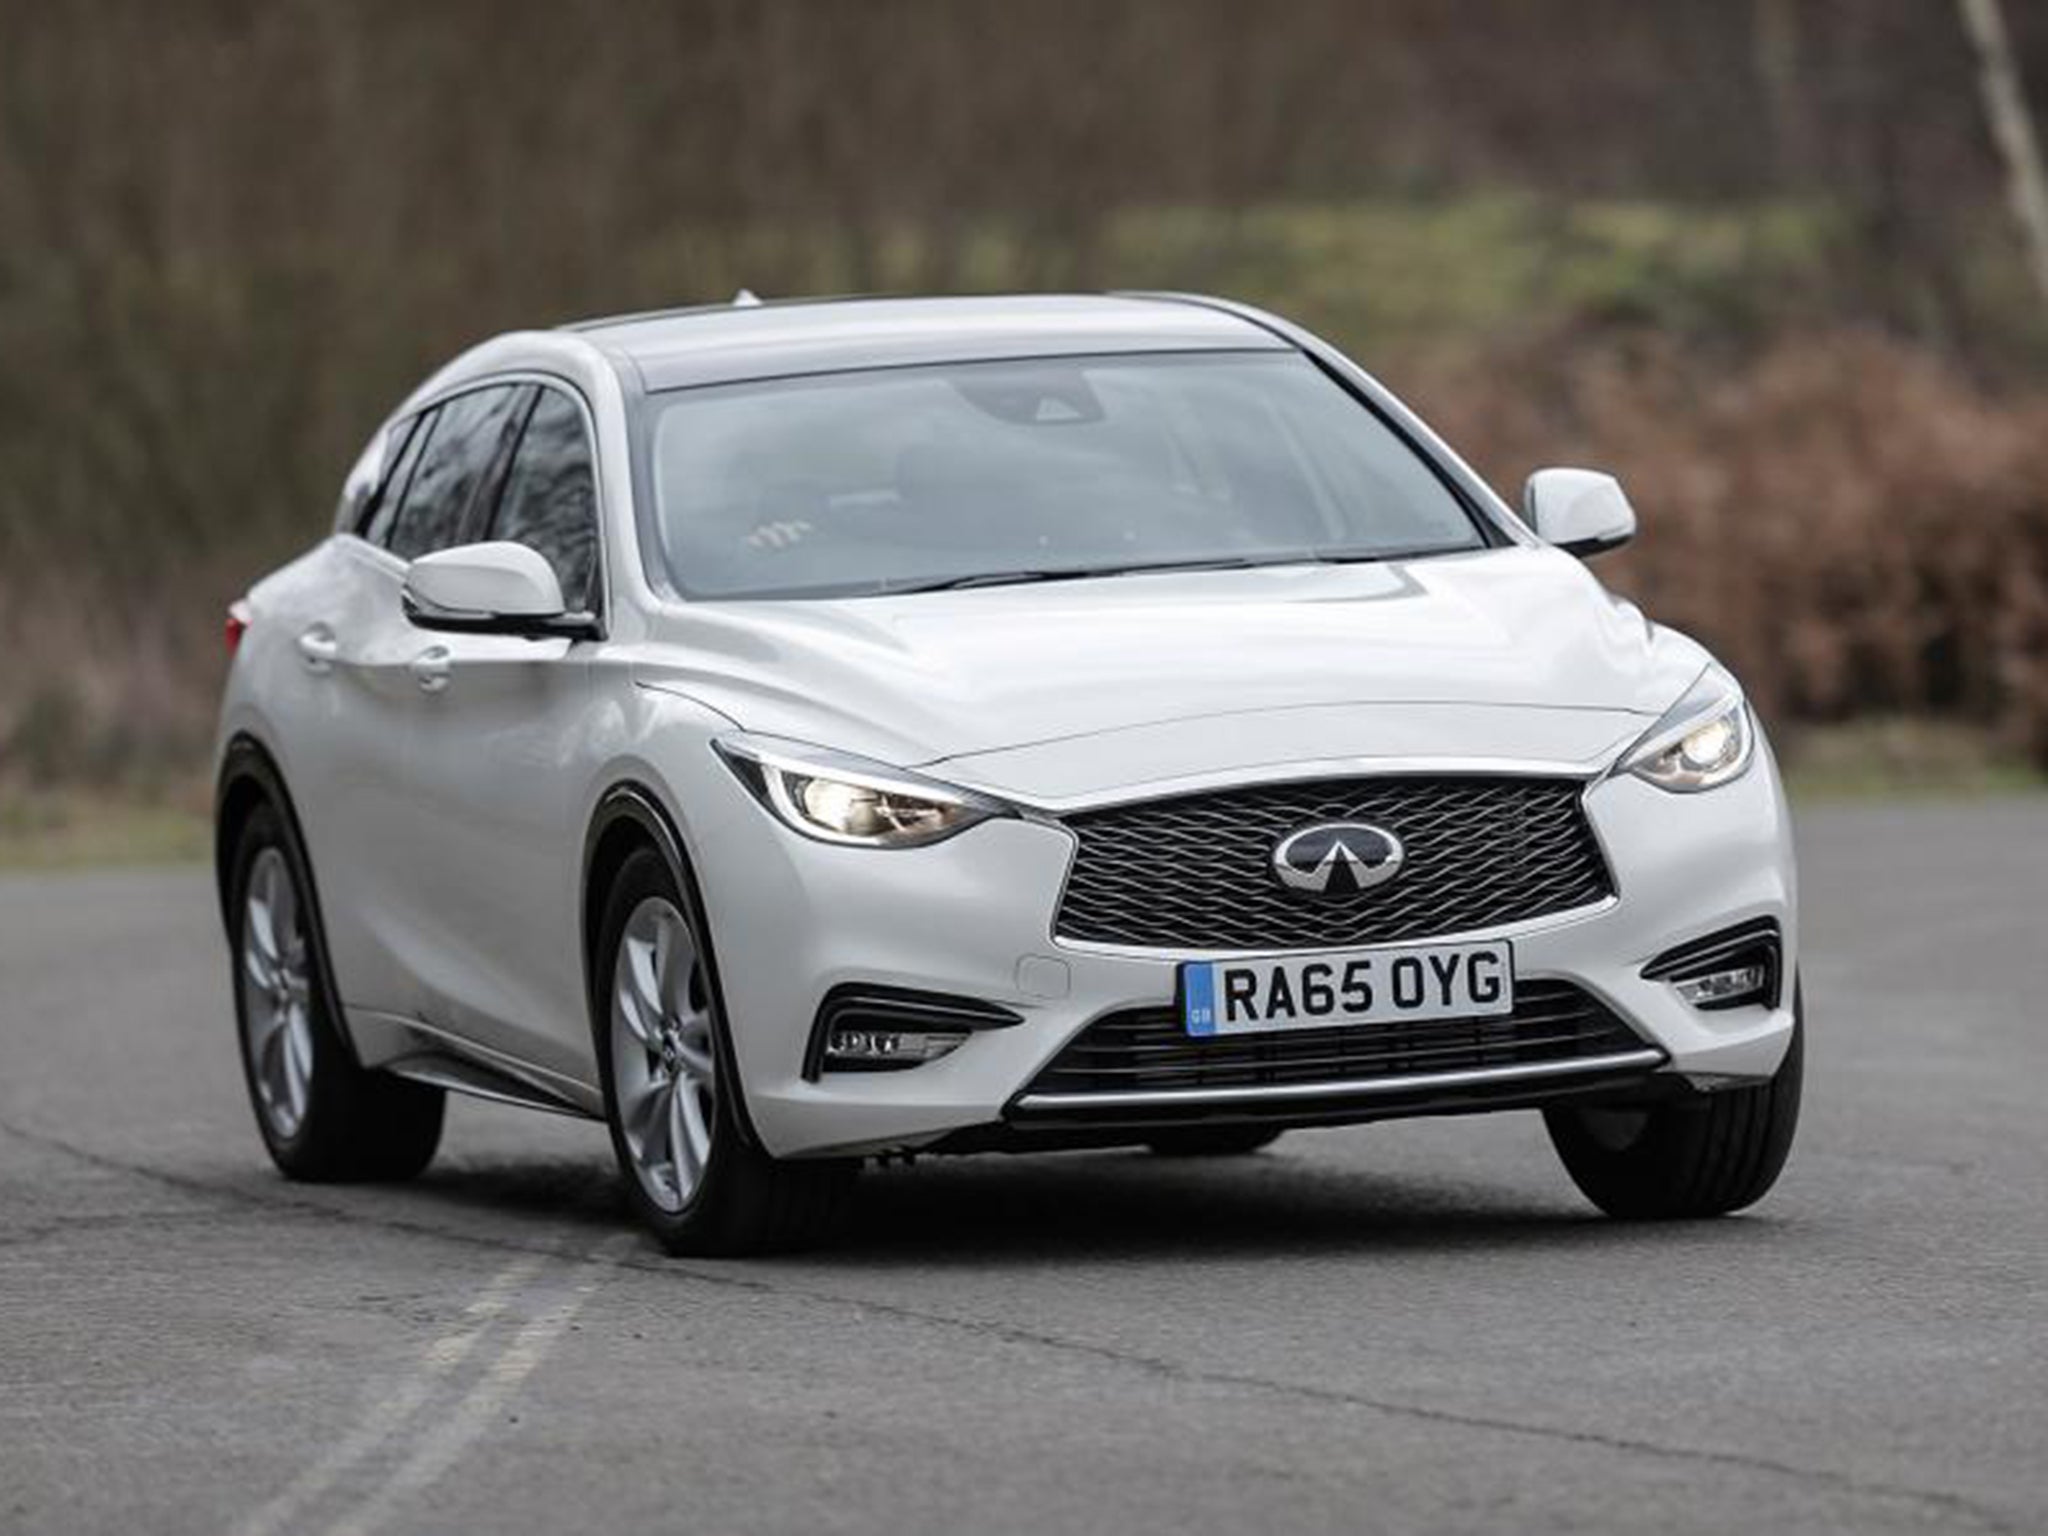 There is a real sense of occasion about the Q30’s styling